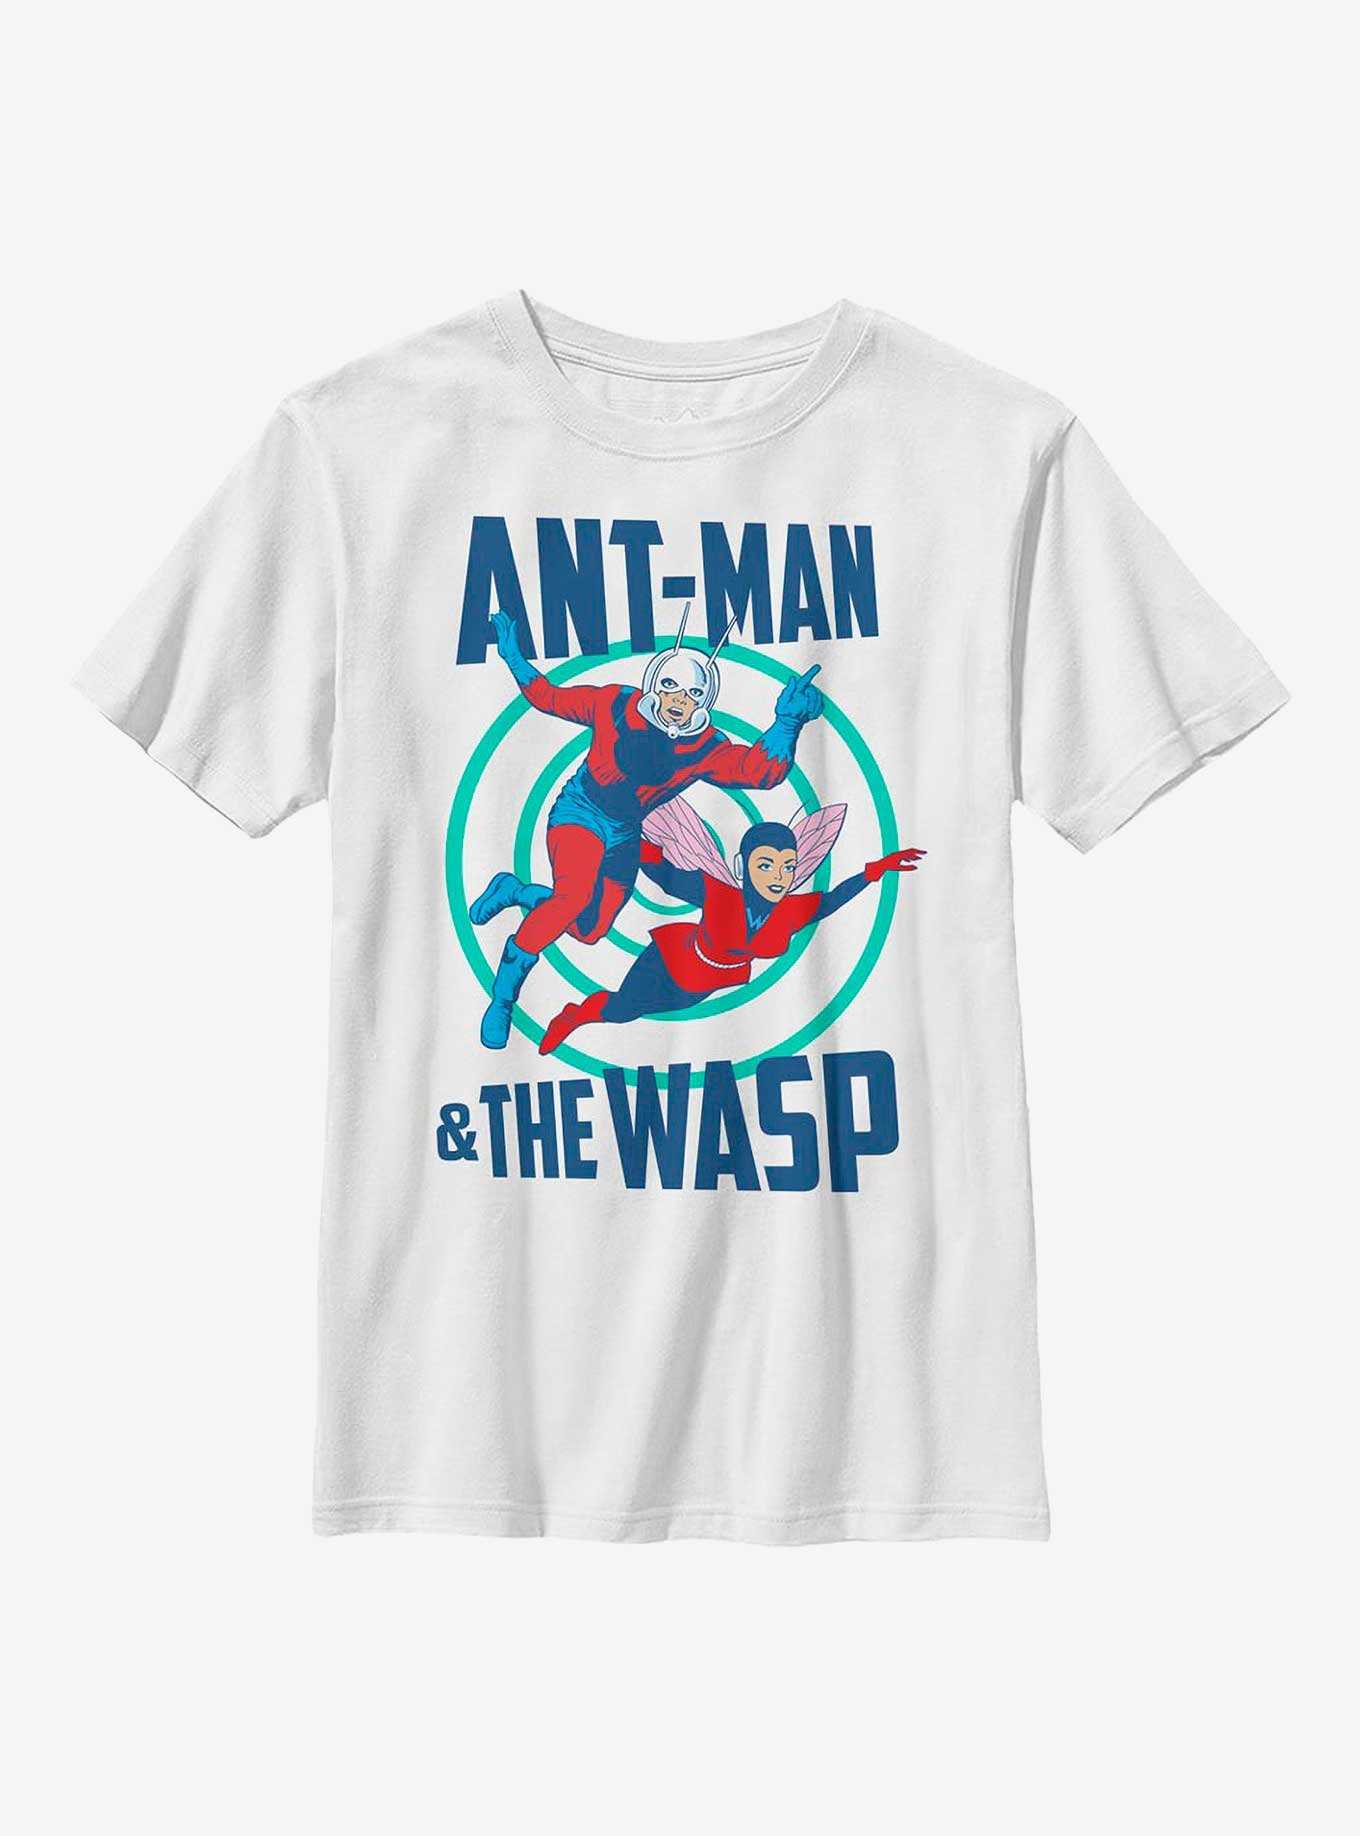 Marvel Ant-Man Retro Ant-Man and the Wasp Youth T-Shirt, , hi-res